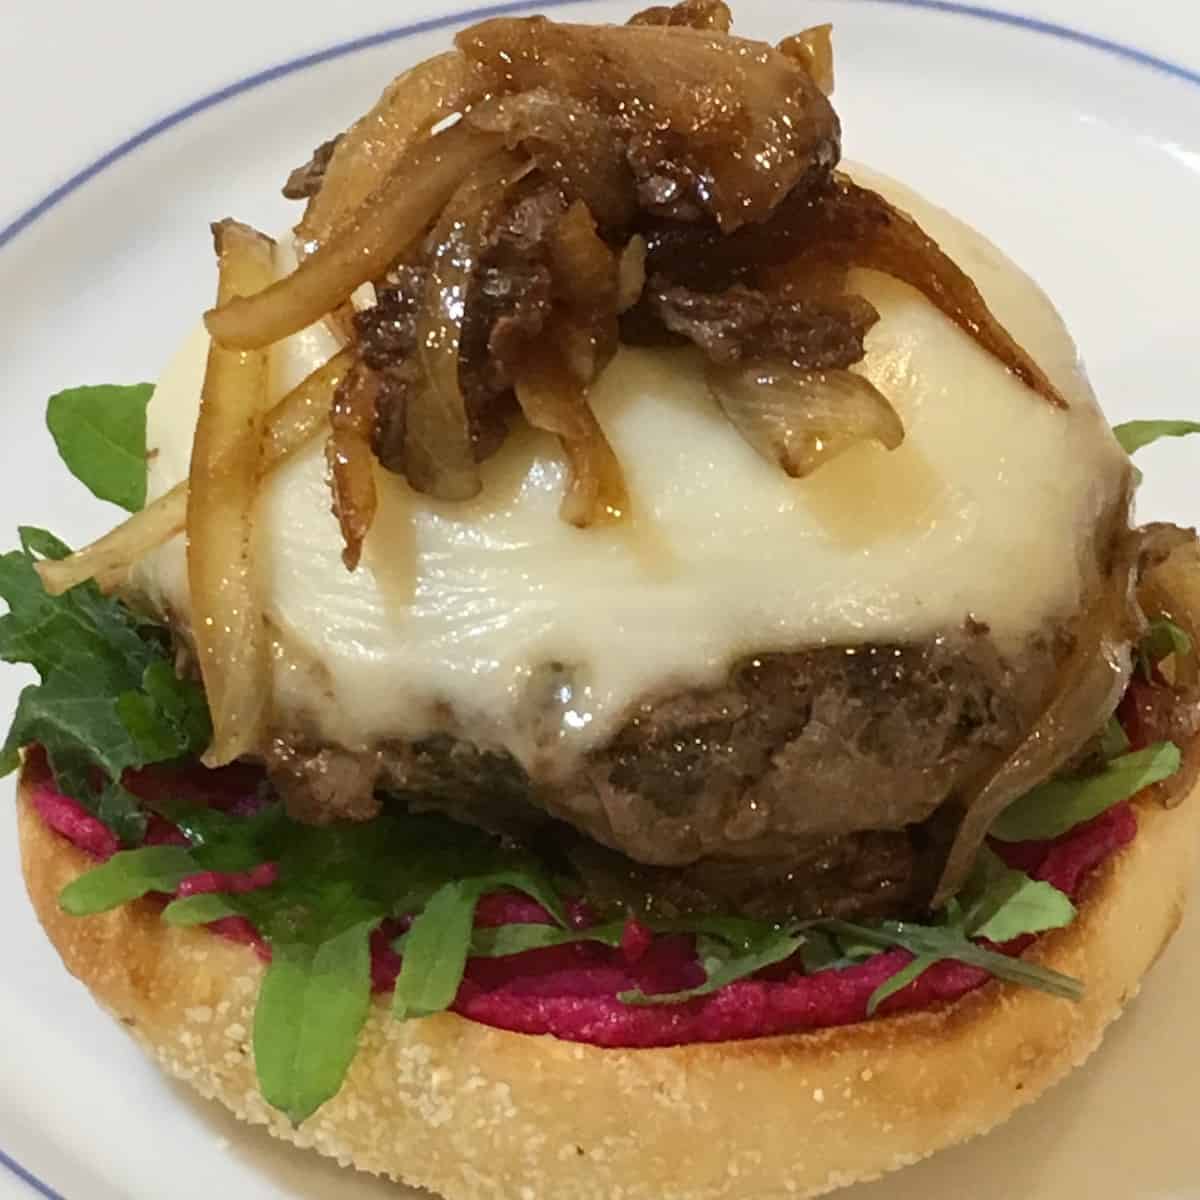 plated burger featuring the mushroom blend